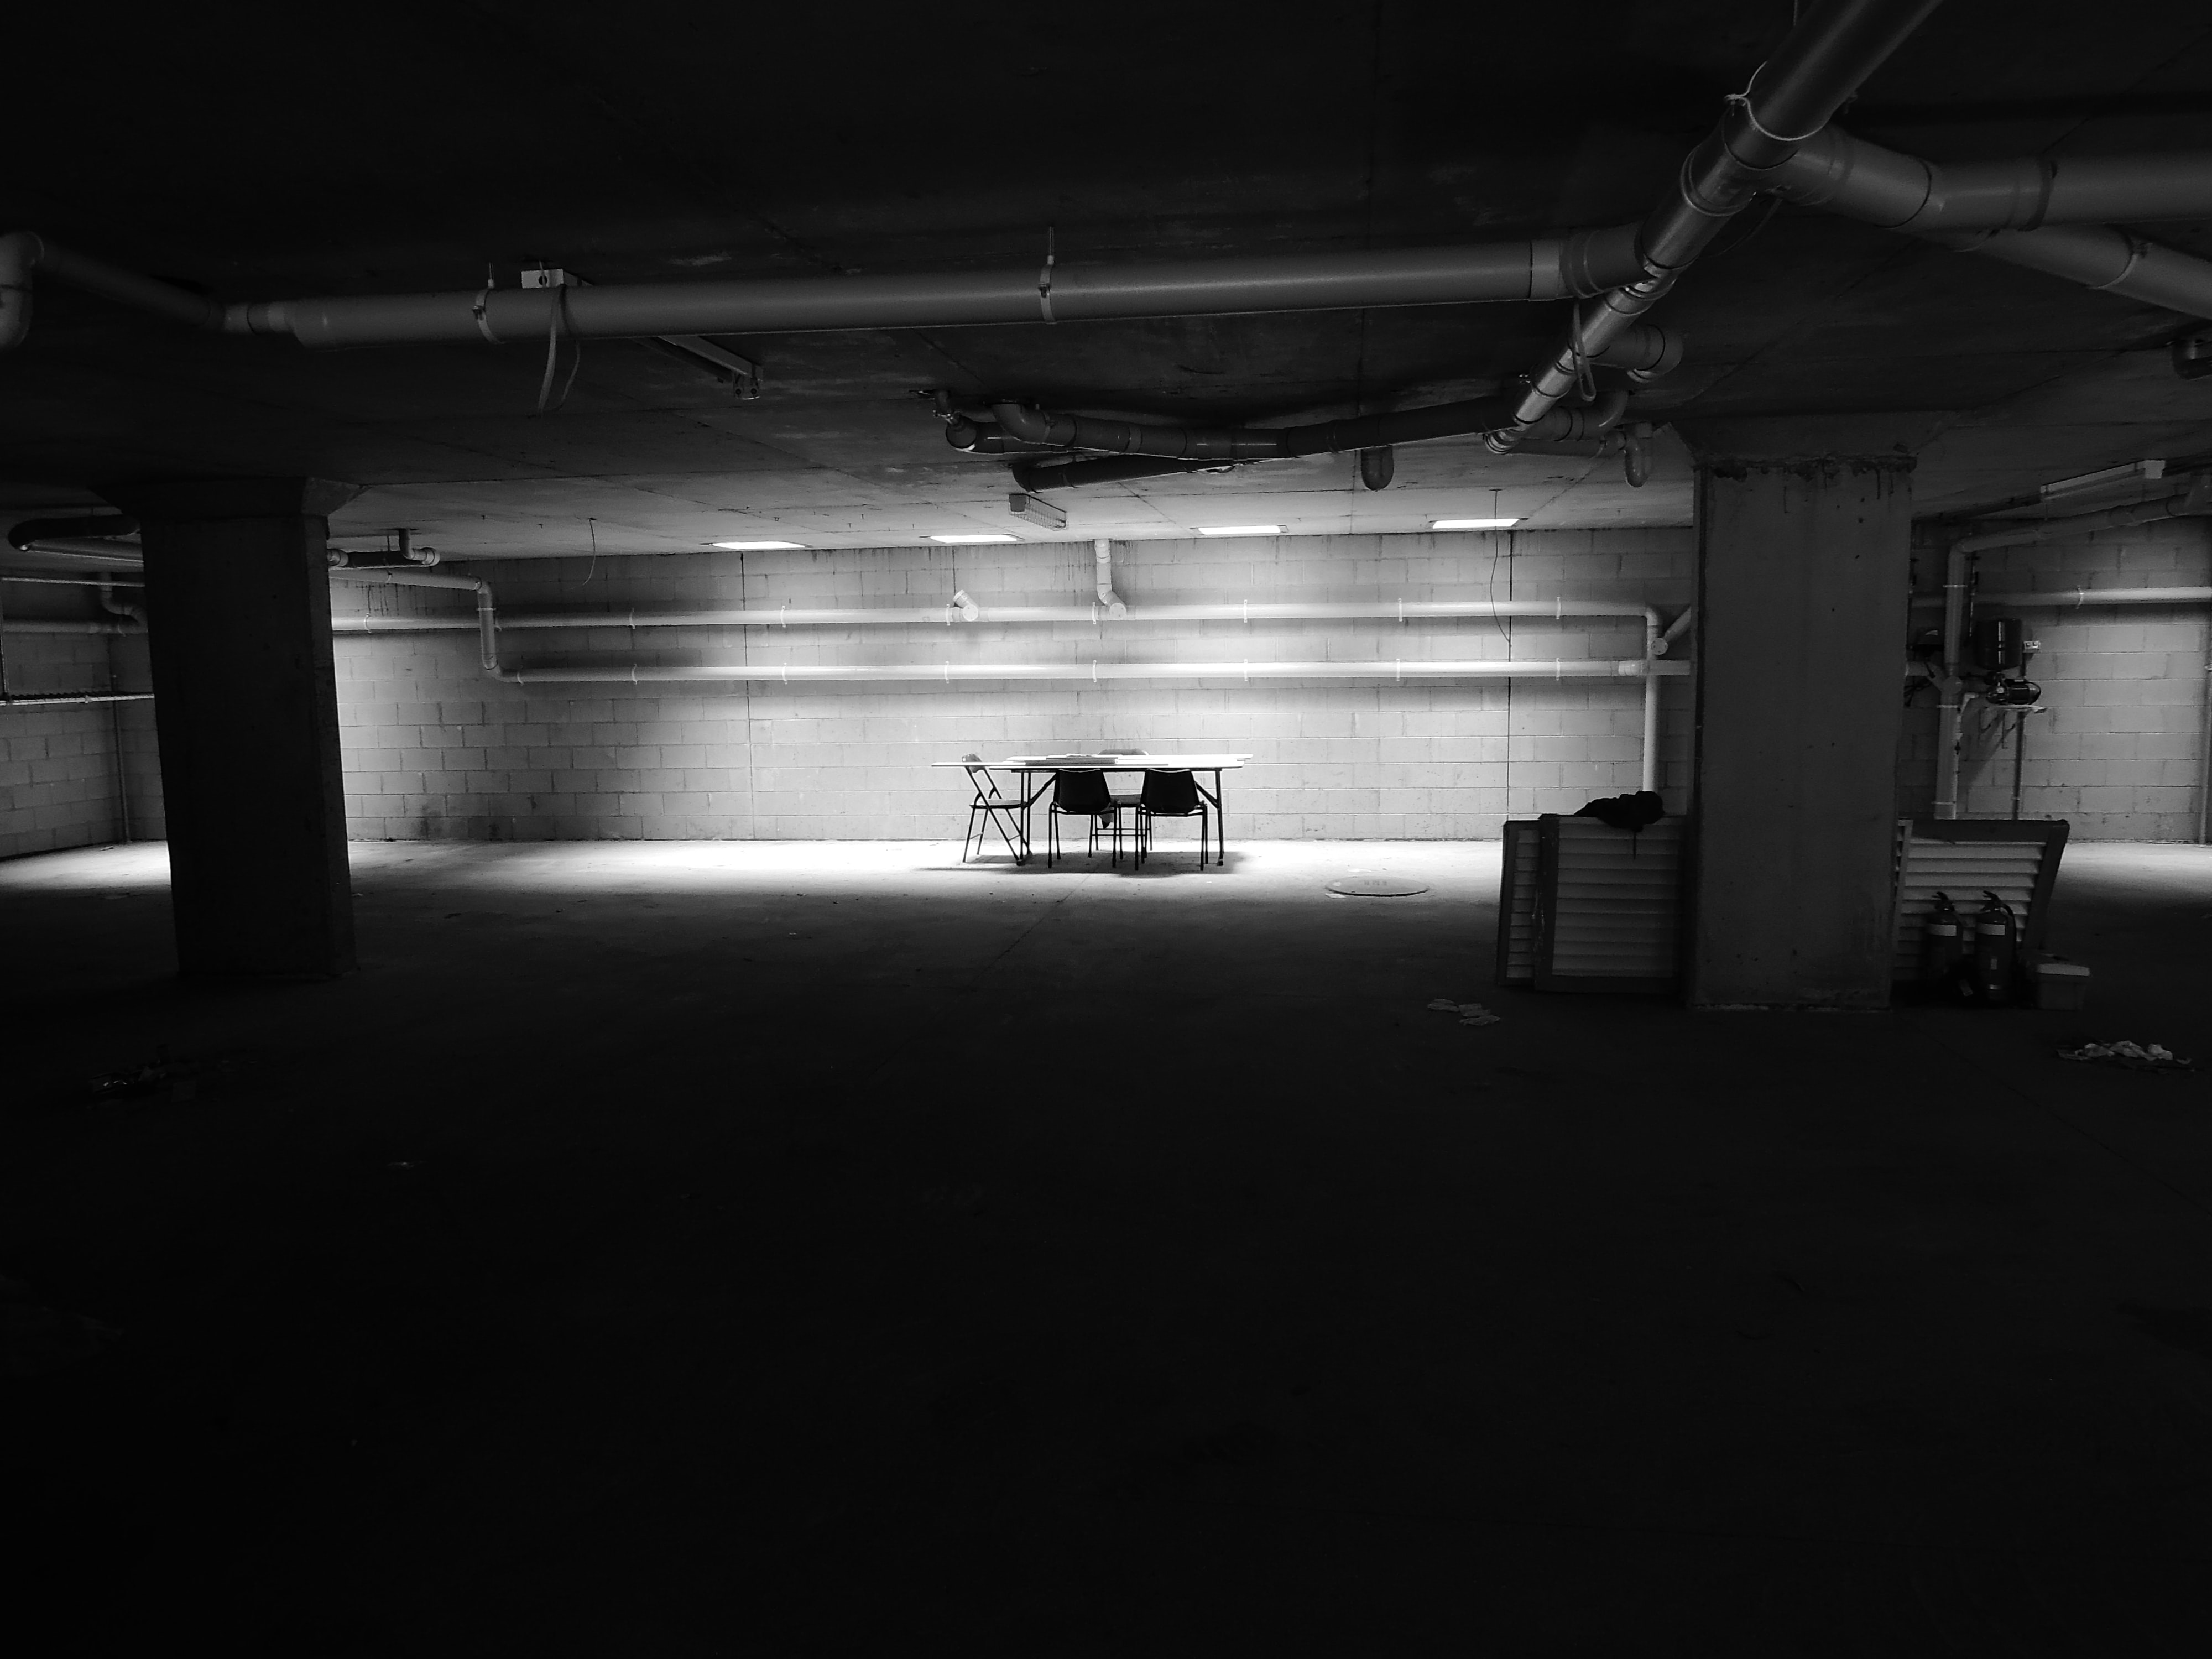 Table and chairs in dark room; image by Jonny Clow, via Unsplash.com.